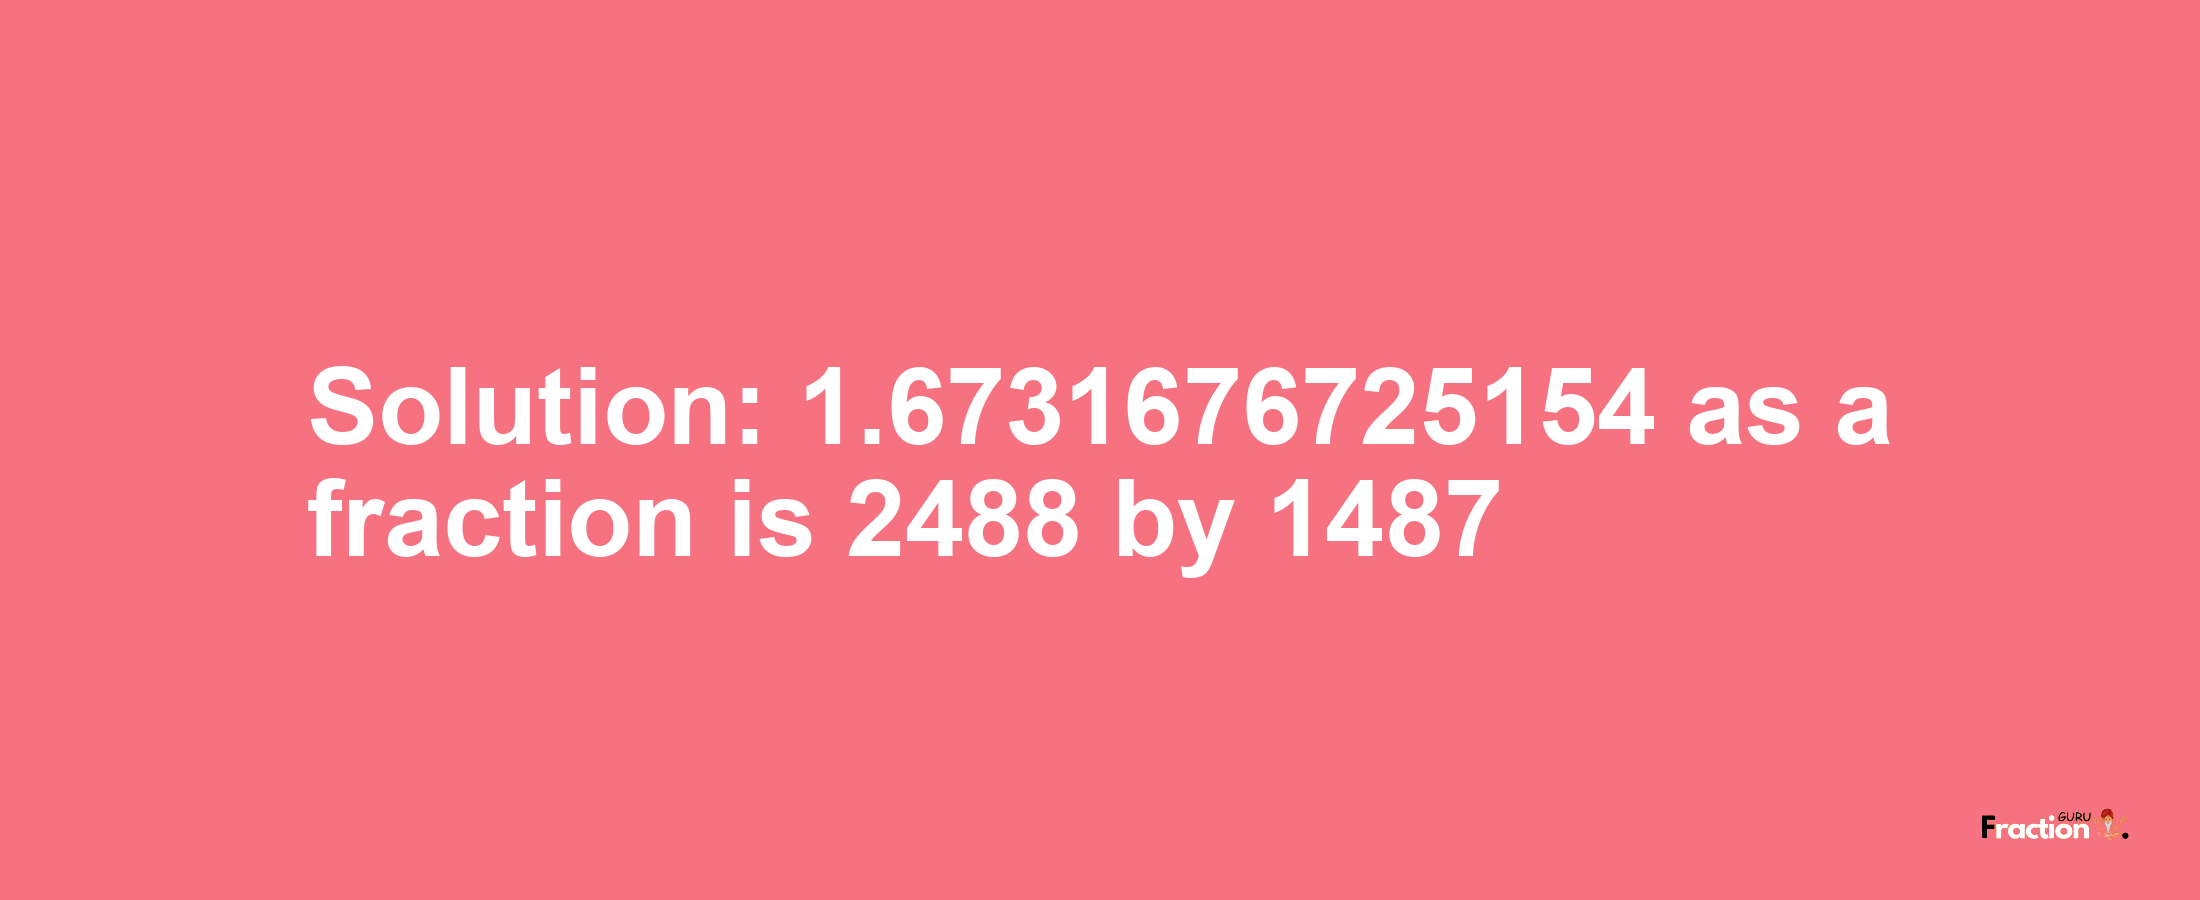 Solution:1.6731676725154 as a fraction is 2488/1487